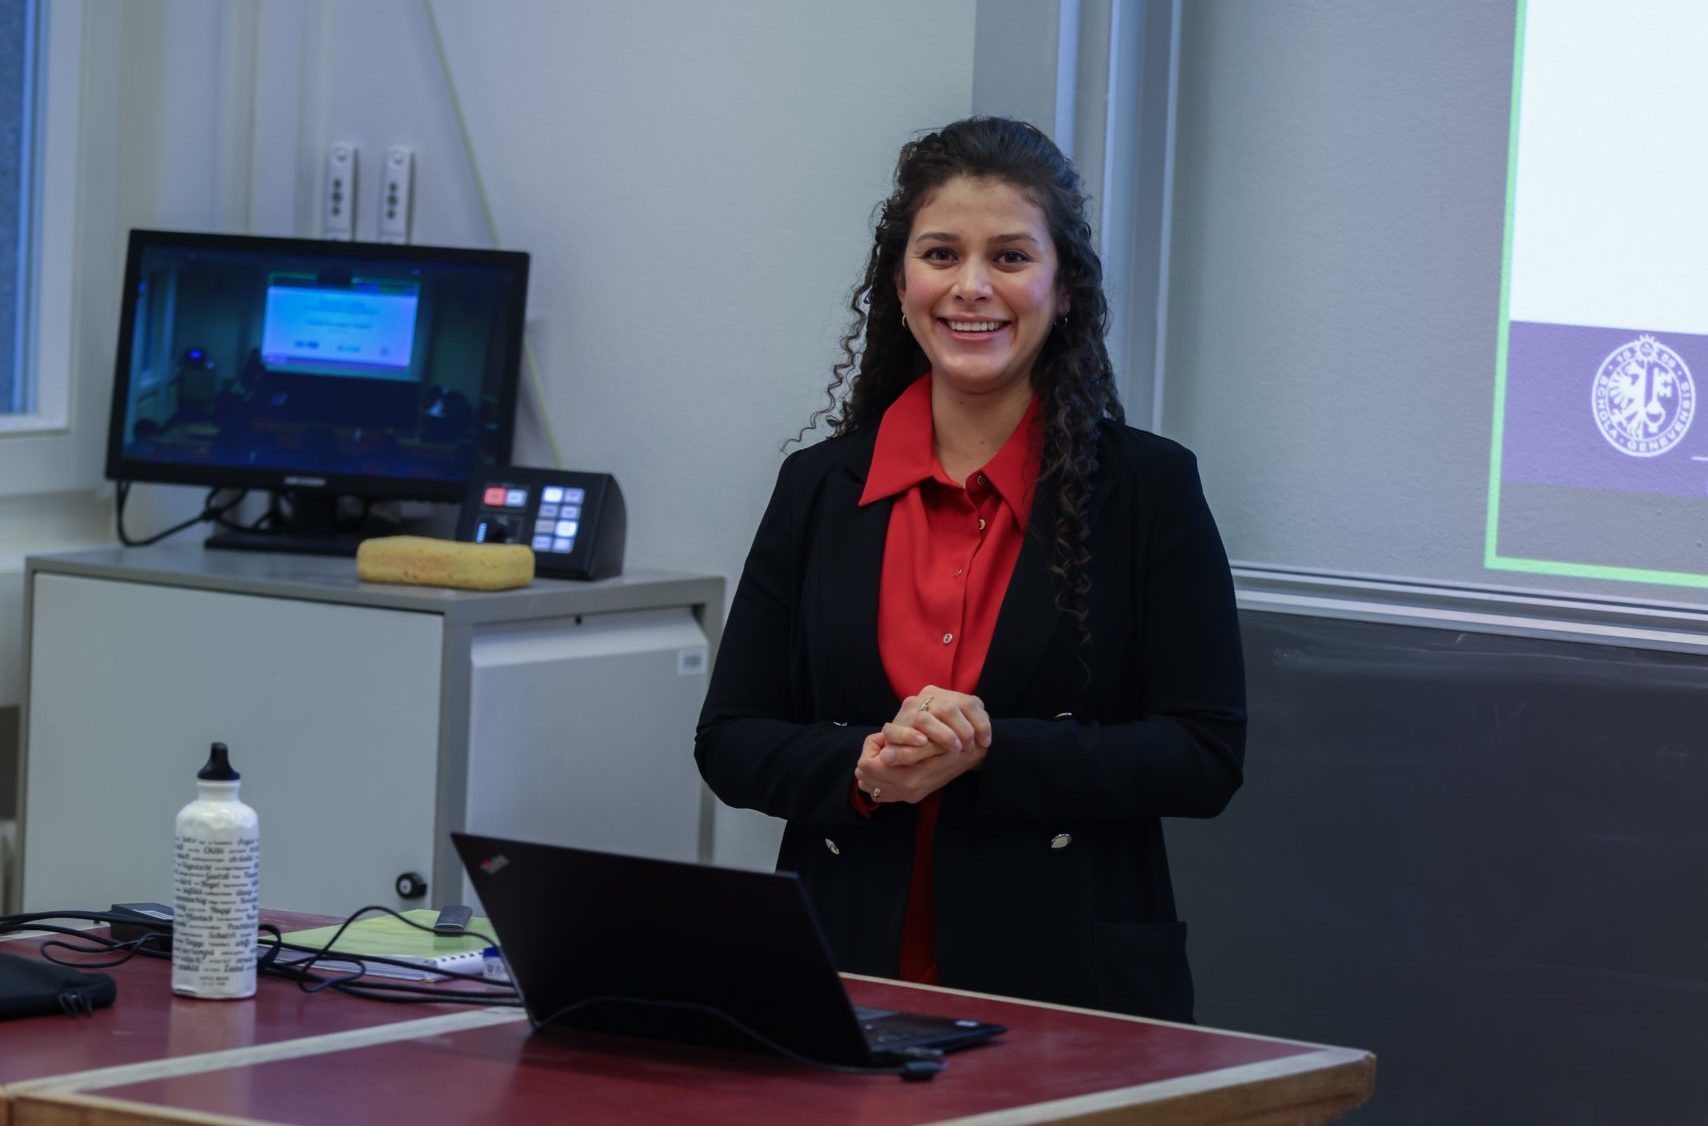 Congratulations to Claribel, who successfully defended her PhD today!